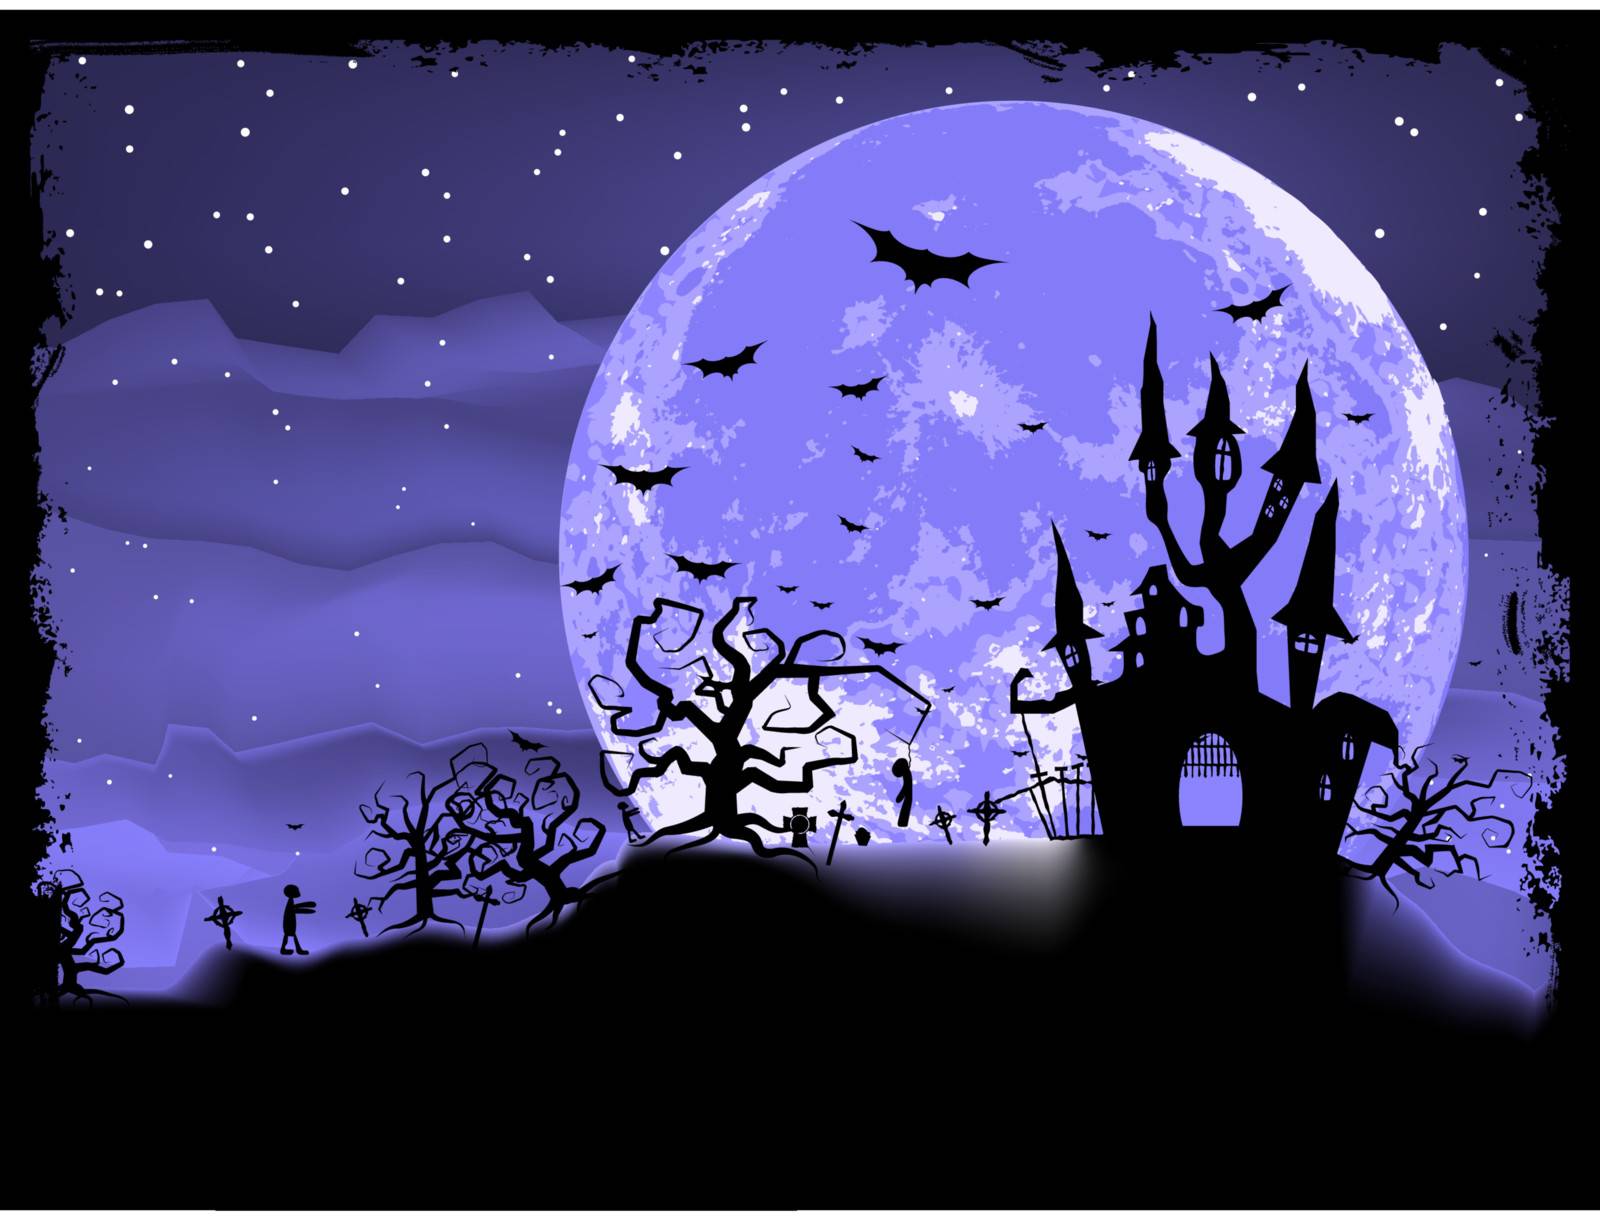 Halloween poster with zombie background. EPS 8 vector file included